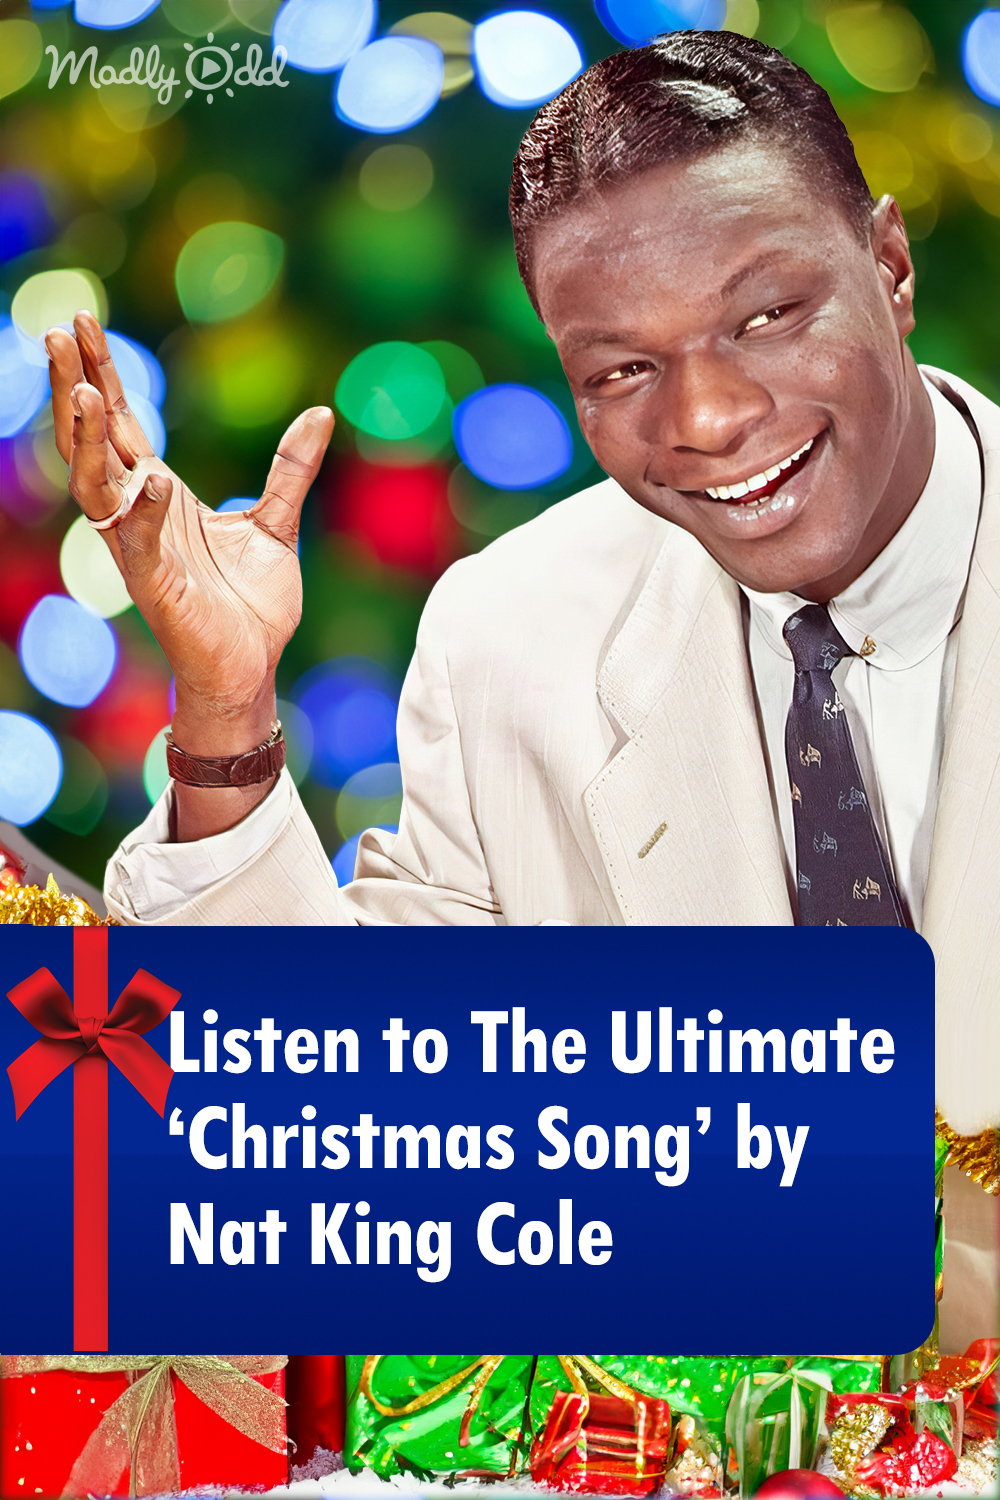 Listen to This Ultimate \'Christmas Song\' by Nat King Cole